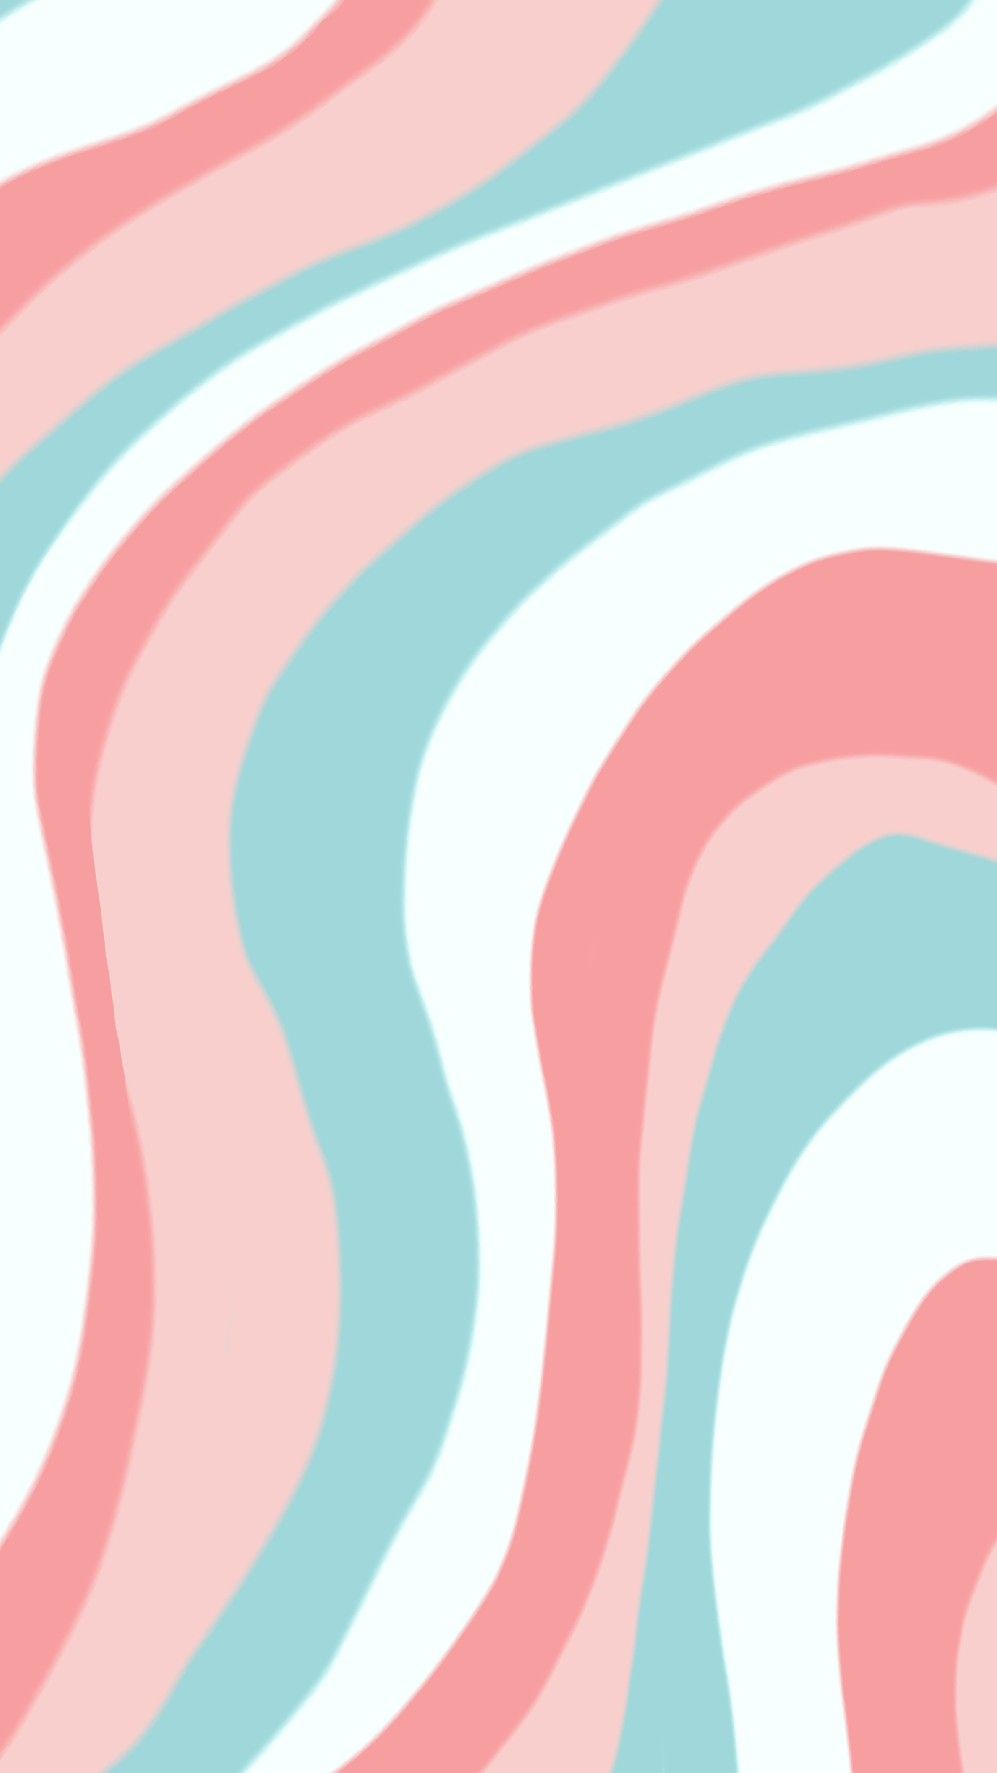 An abstract background image of pastel pink and blue tones - Colorful, pastel, Danish